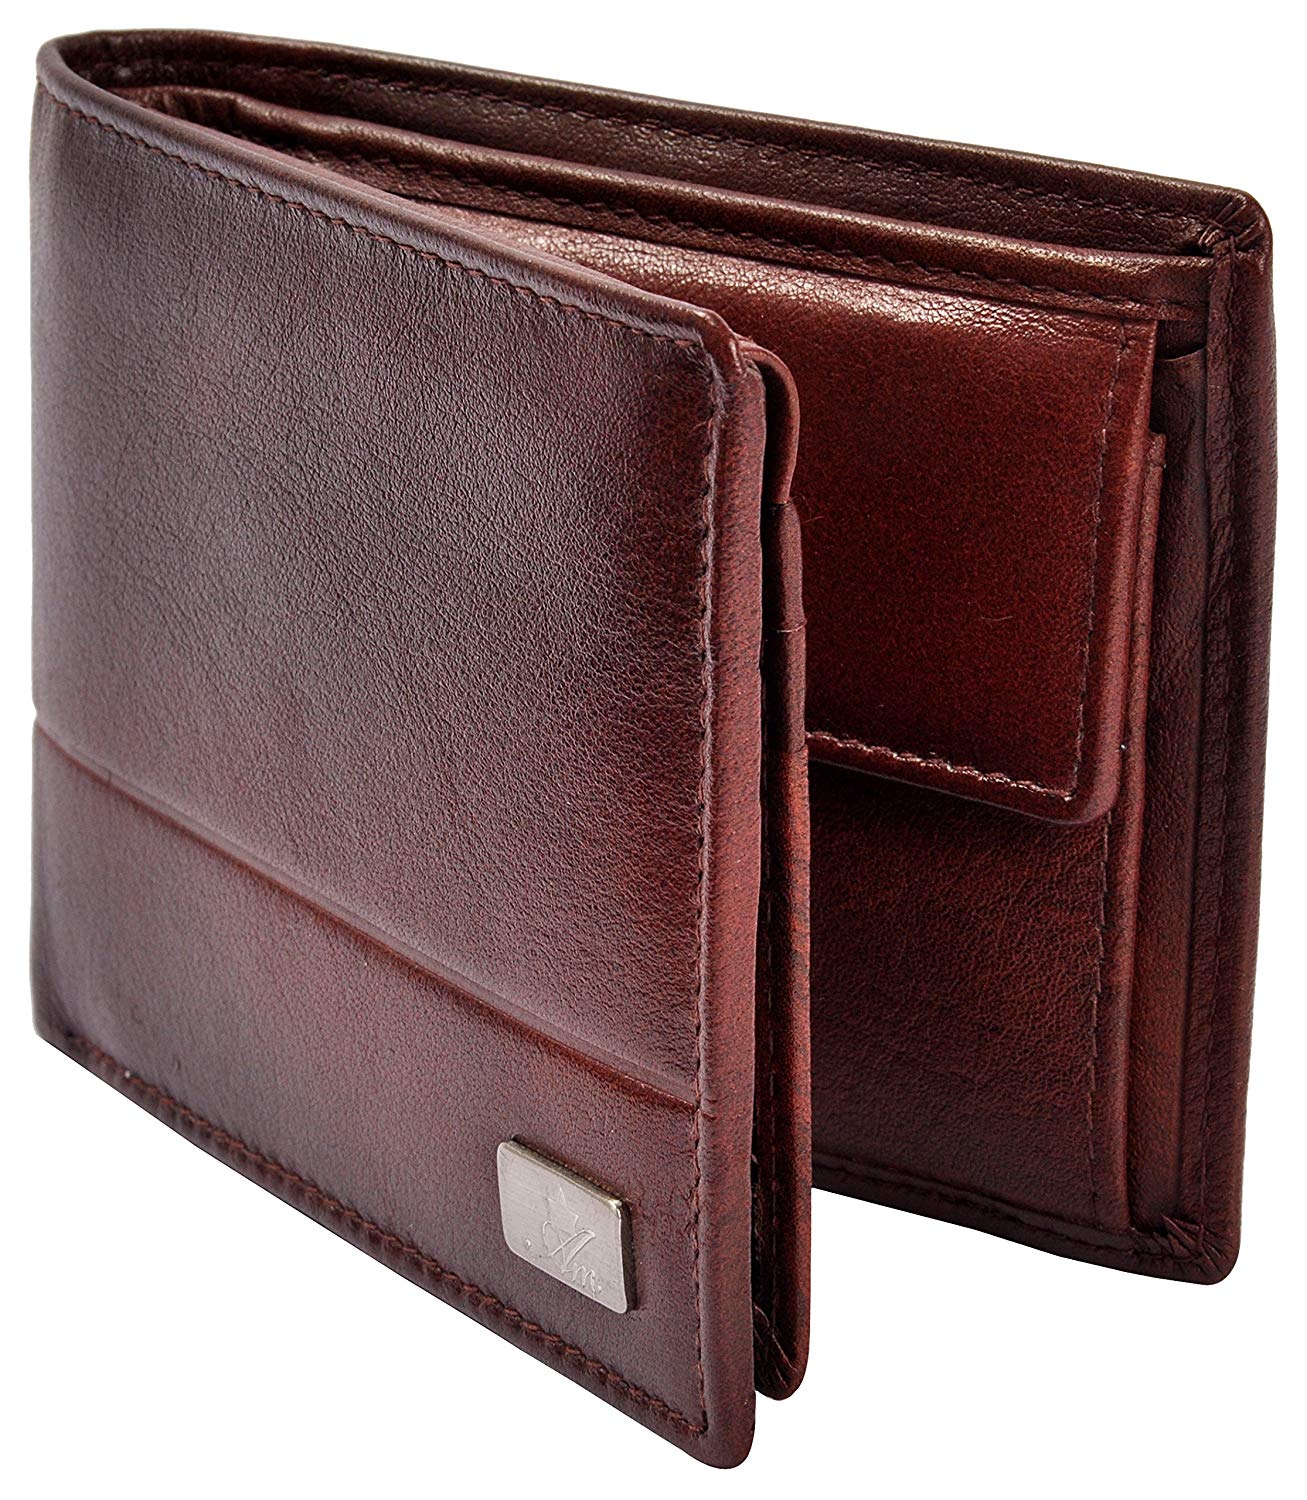 AM LEATHER  Brown  Men s  Wallet  Guys World